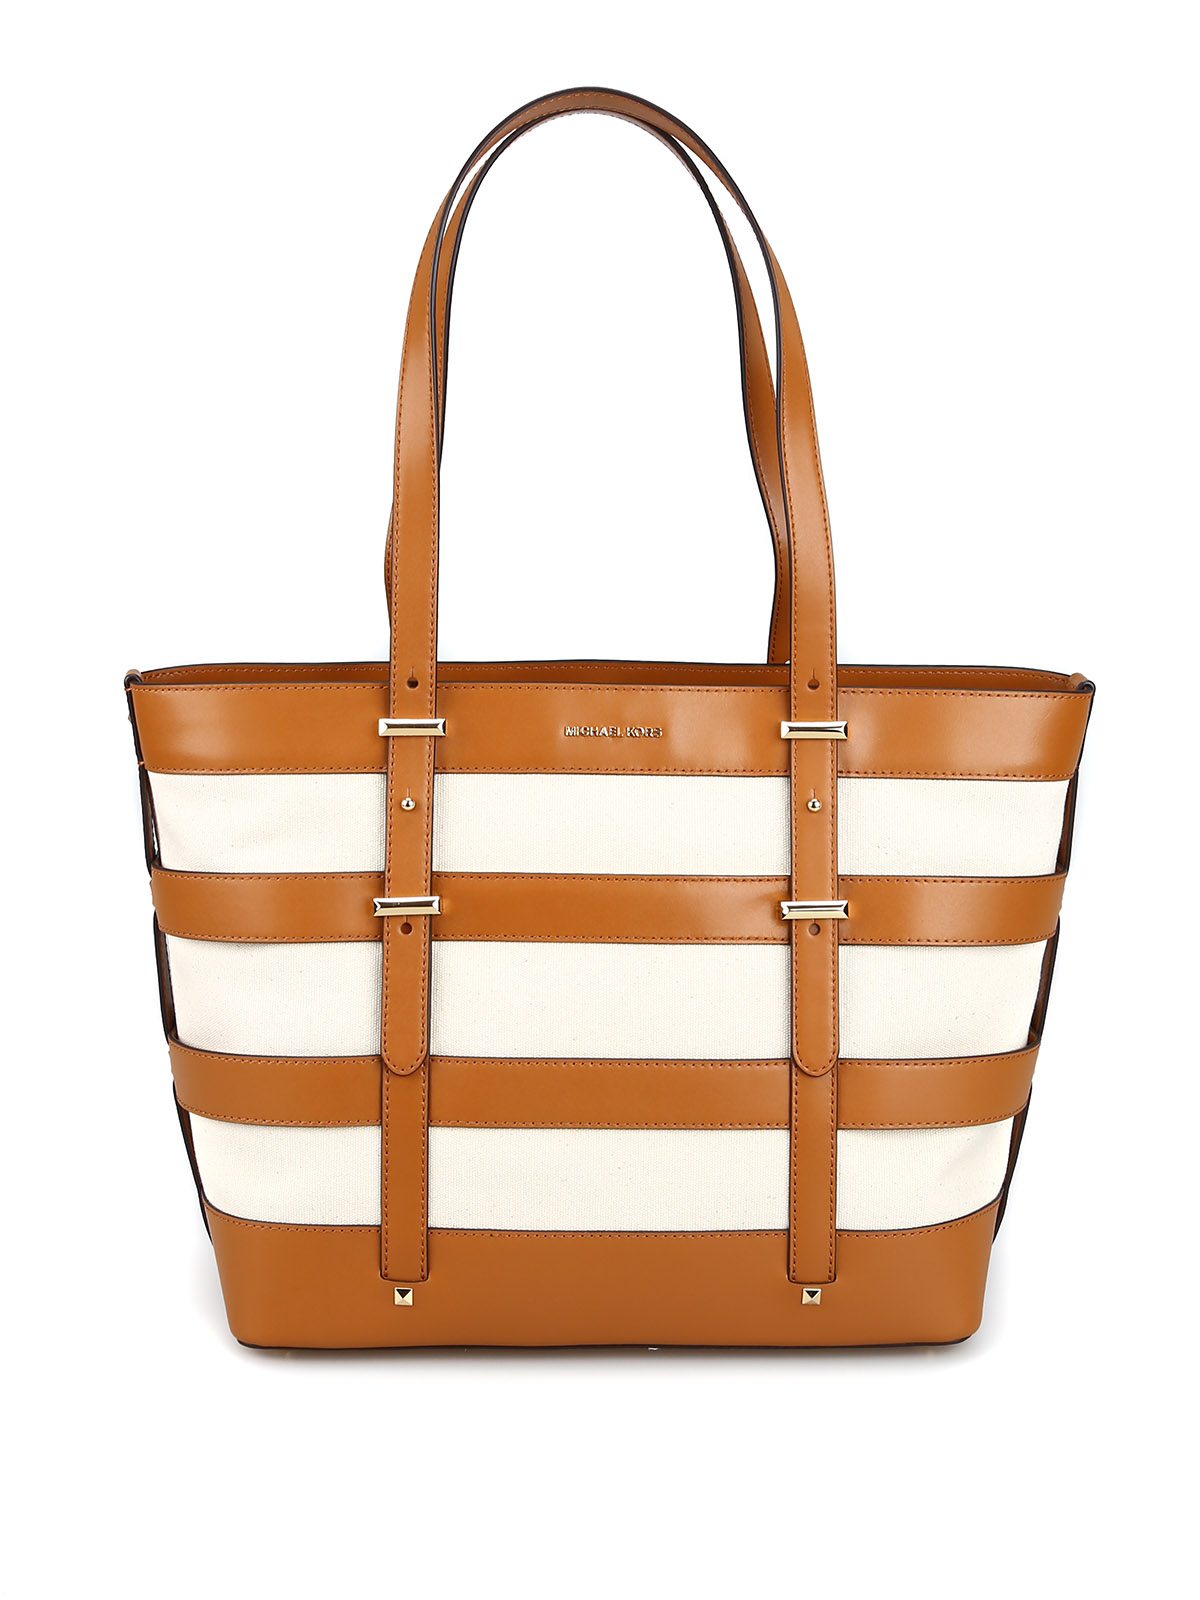 michael kors cage tote